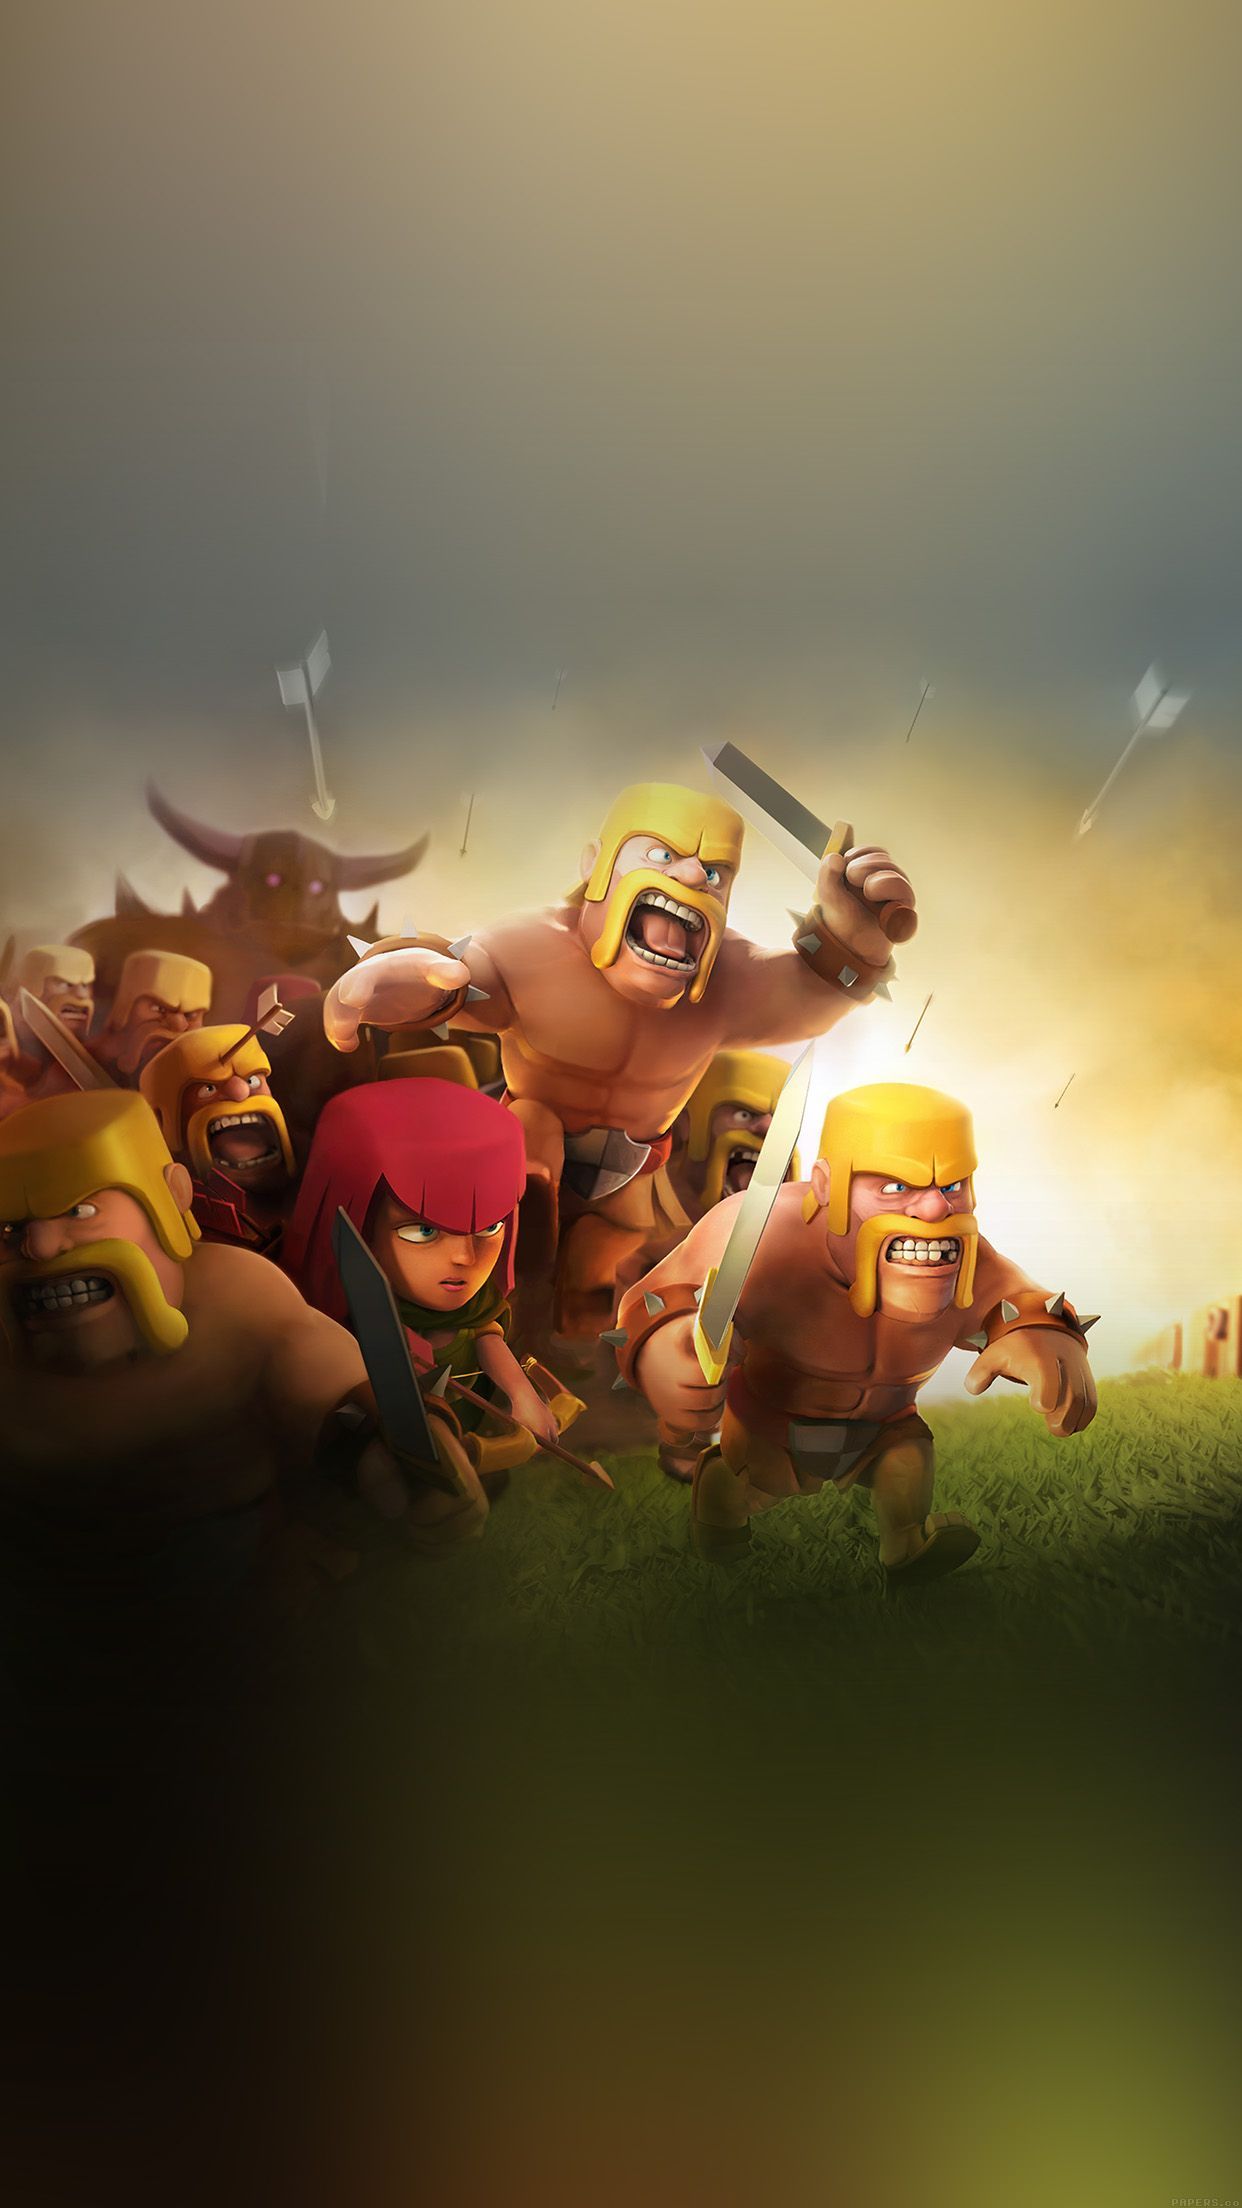 Clash of Clans iPhone Wallpaper Free Clash of Clans iPhone